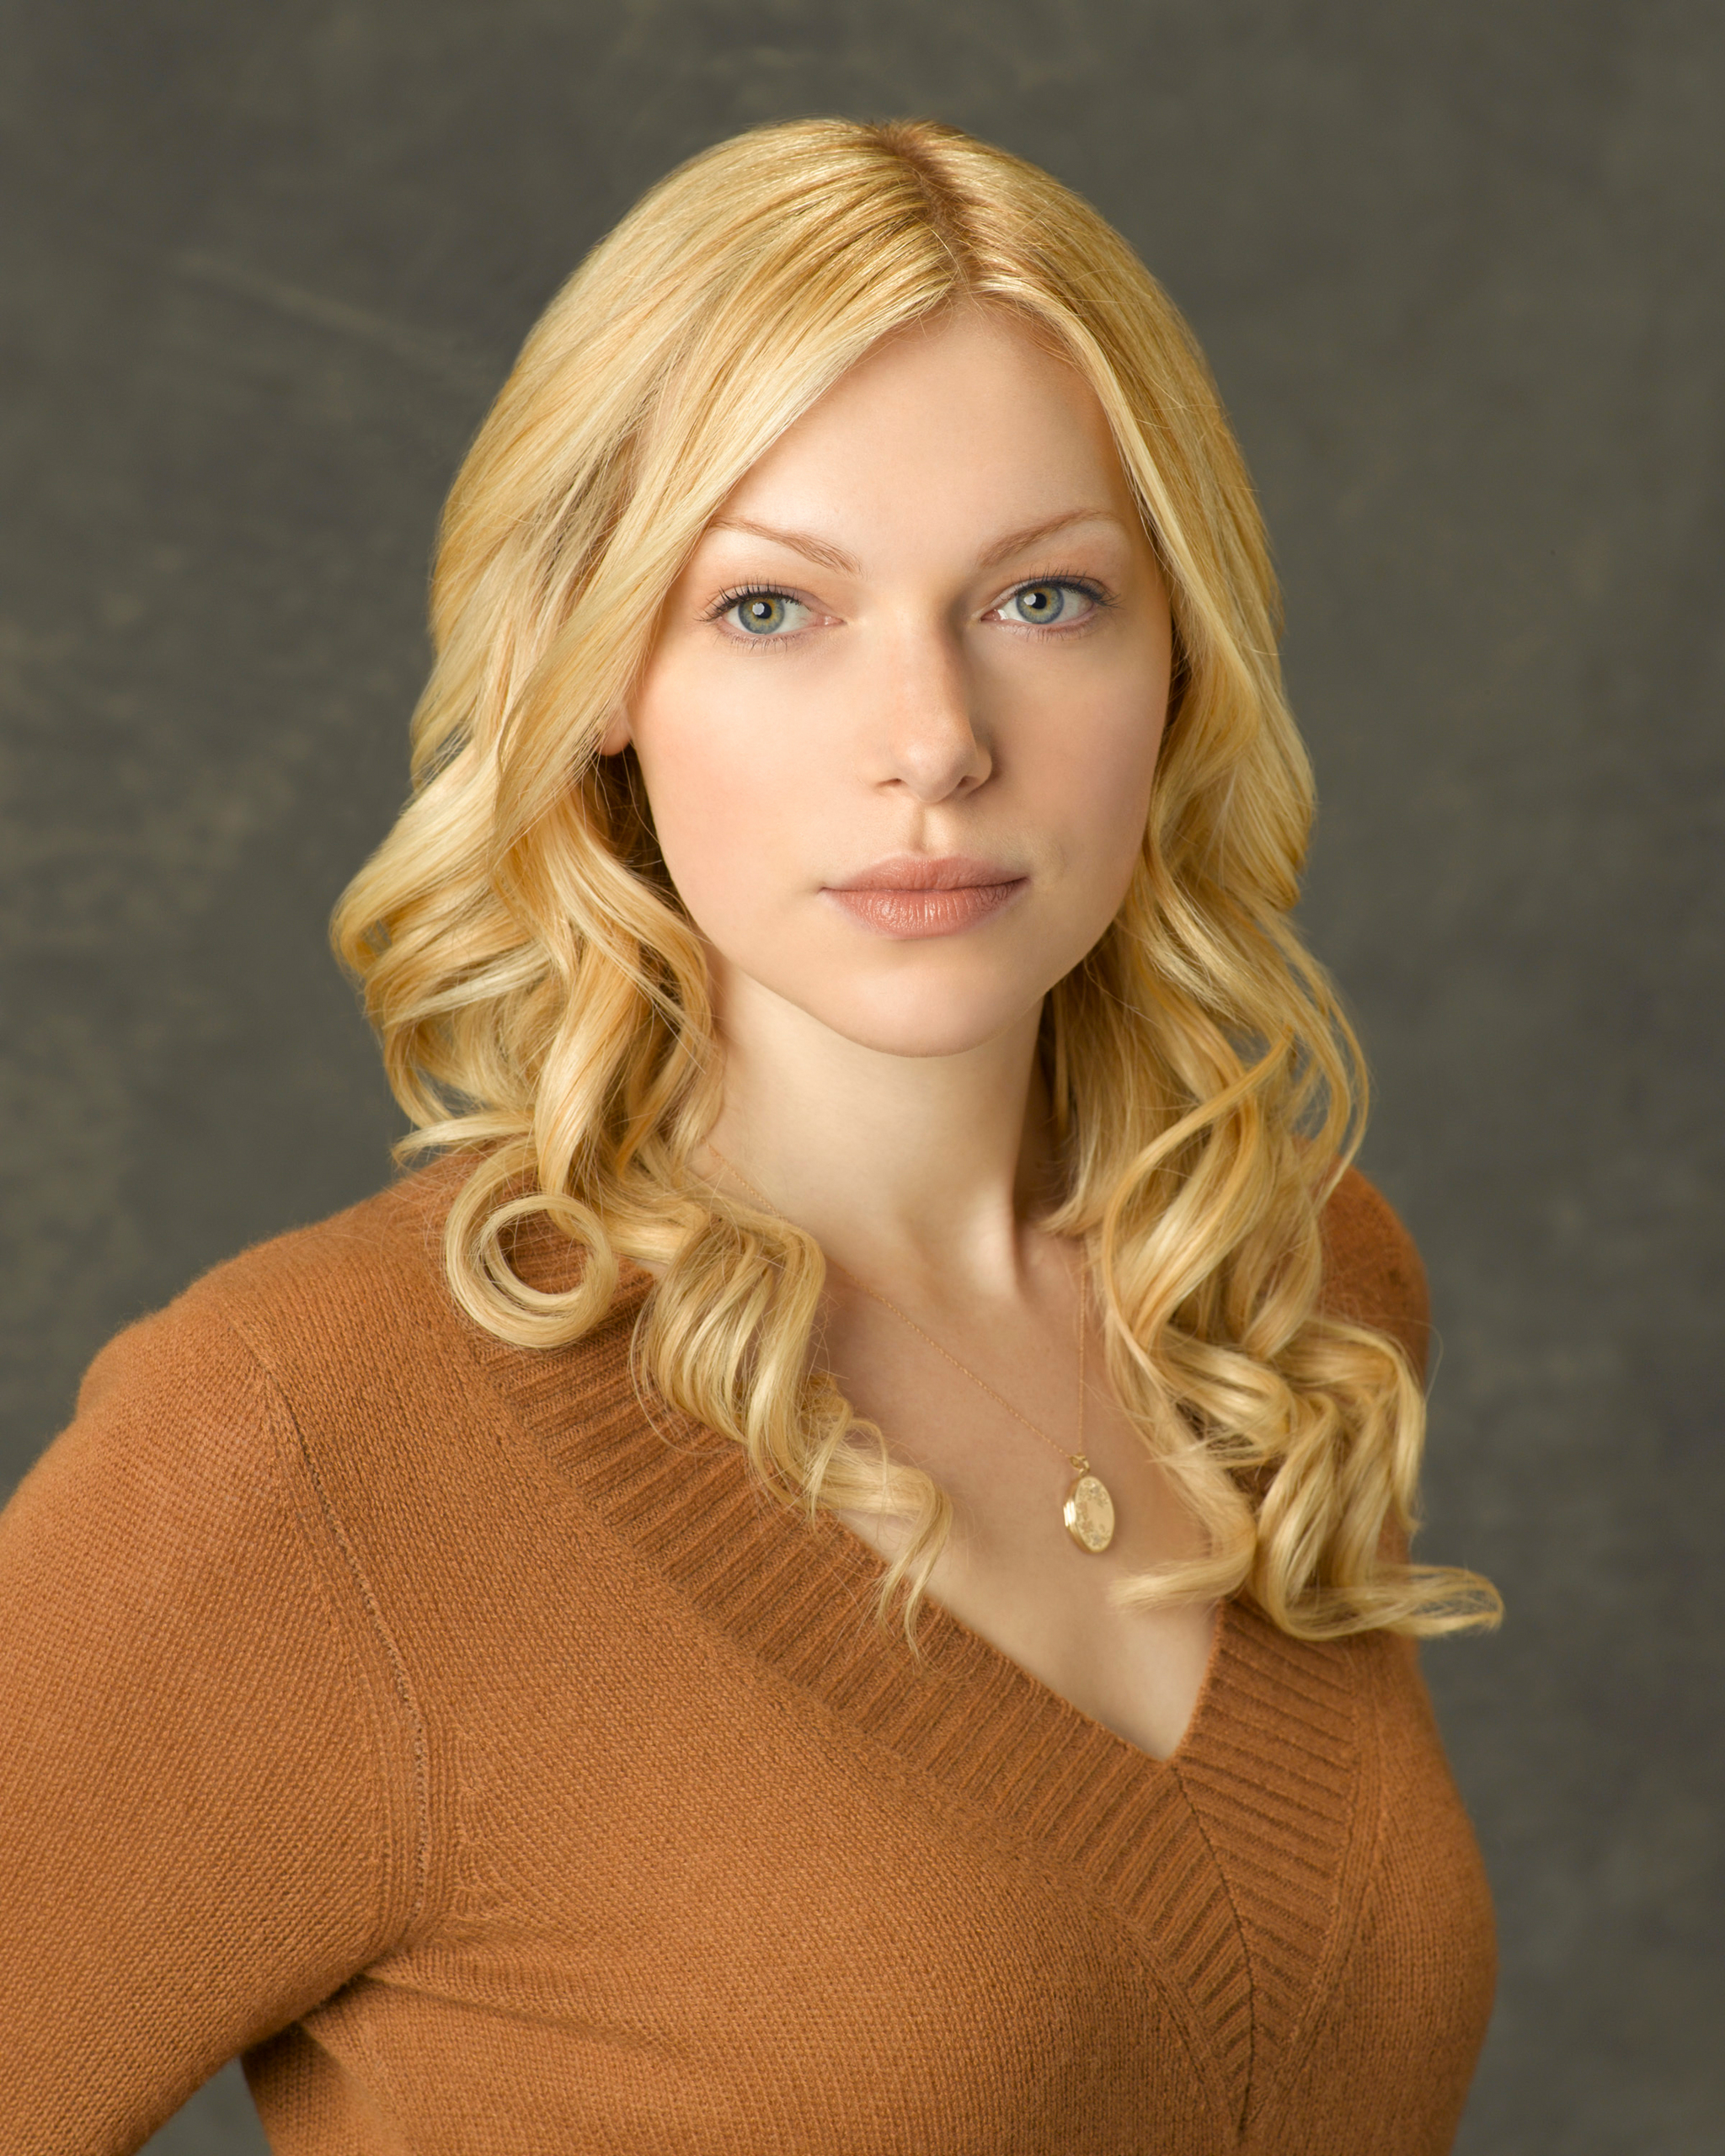 laura-prepon-young